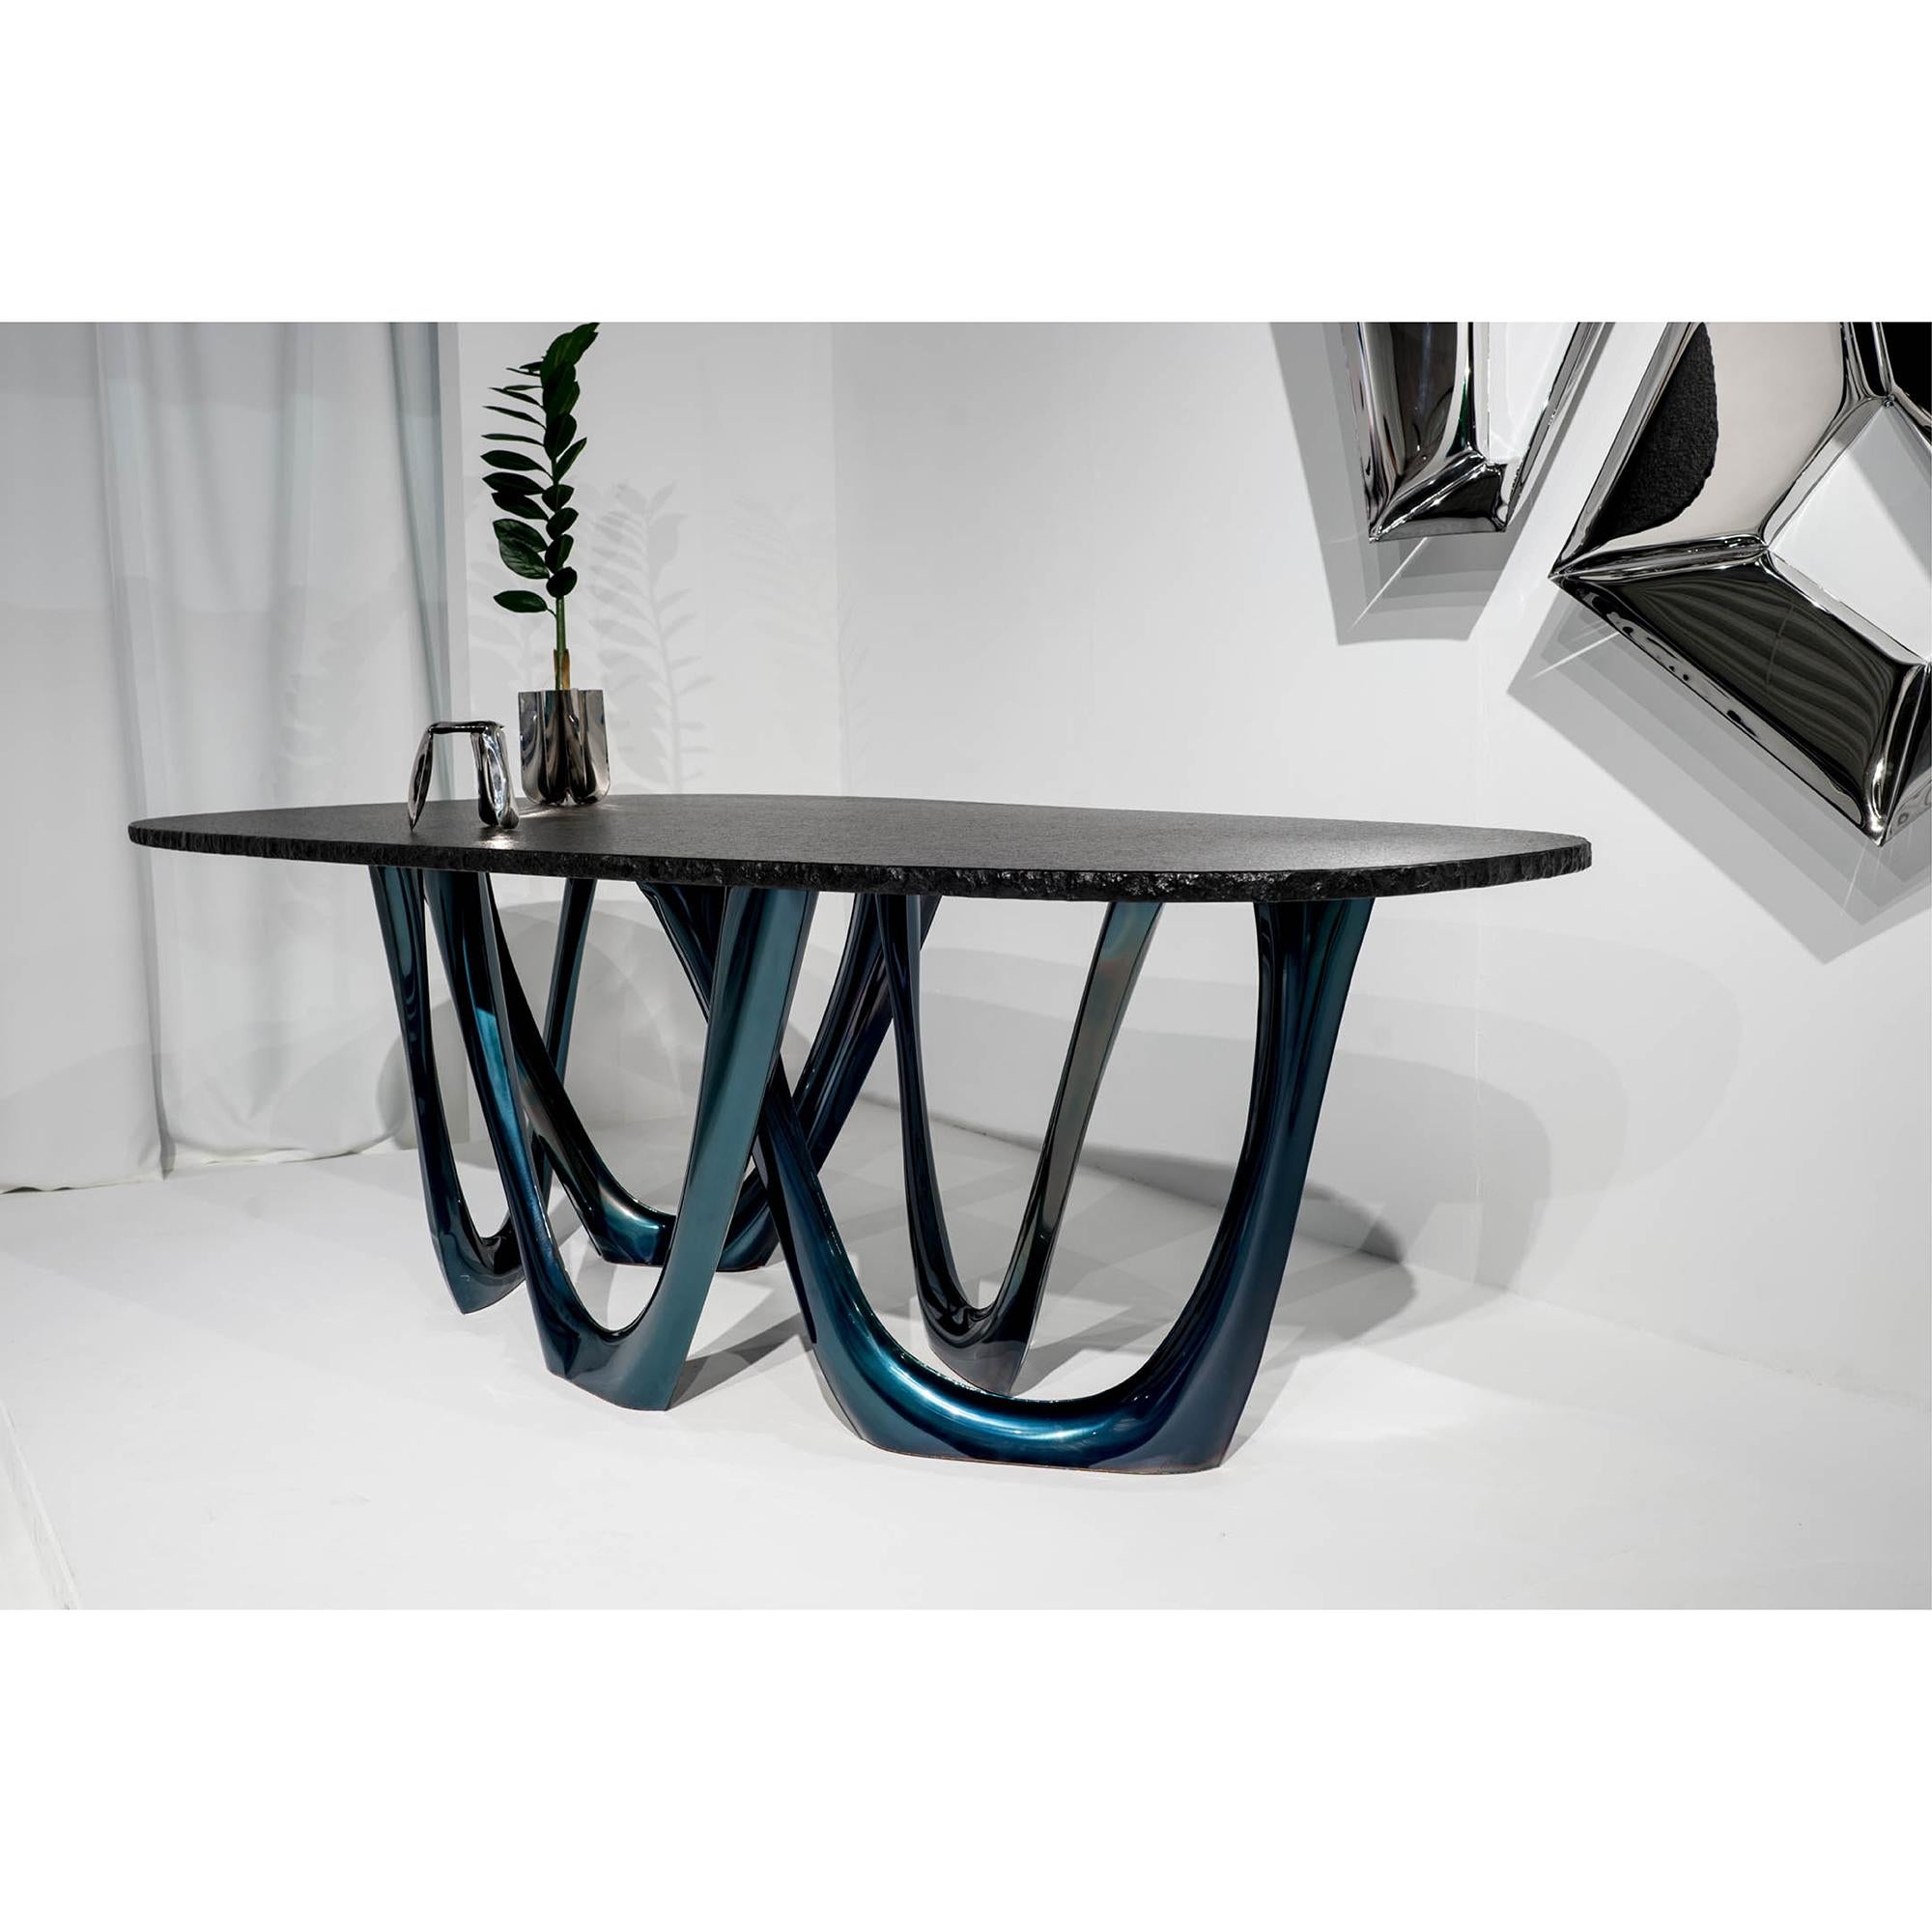 Modern G-Table Cosmos with Granite Top by Zieta